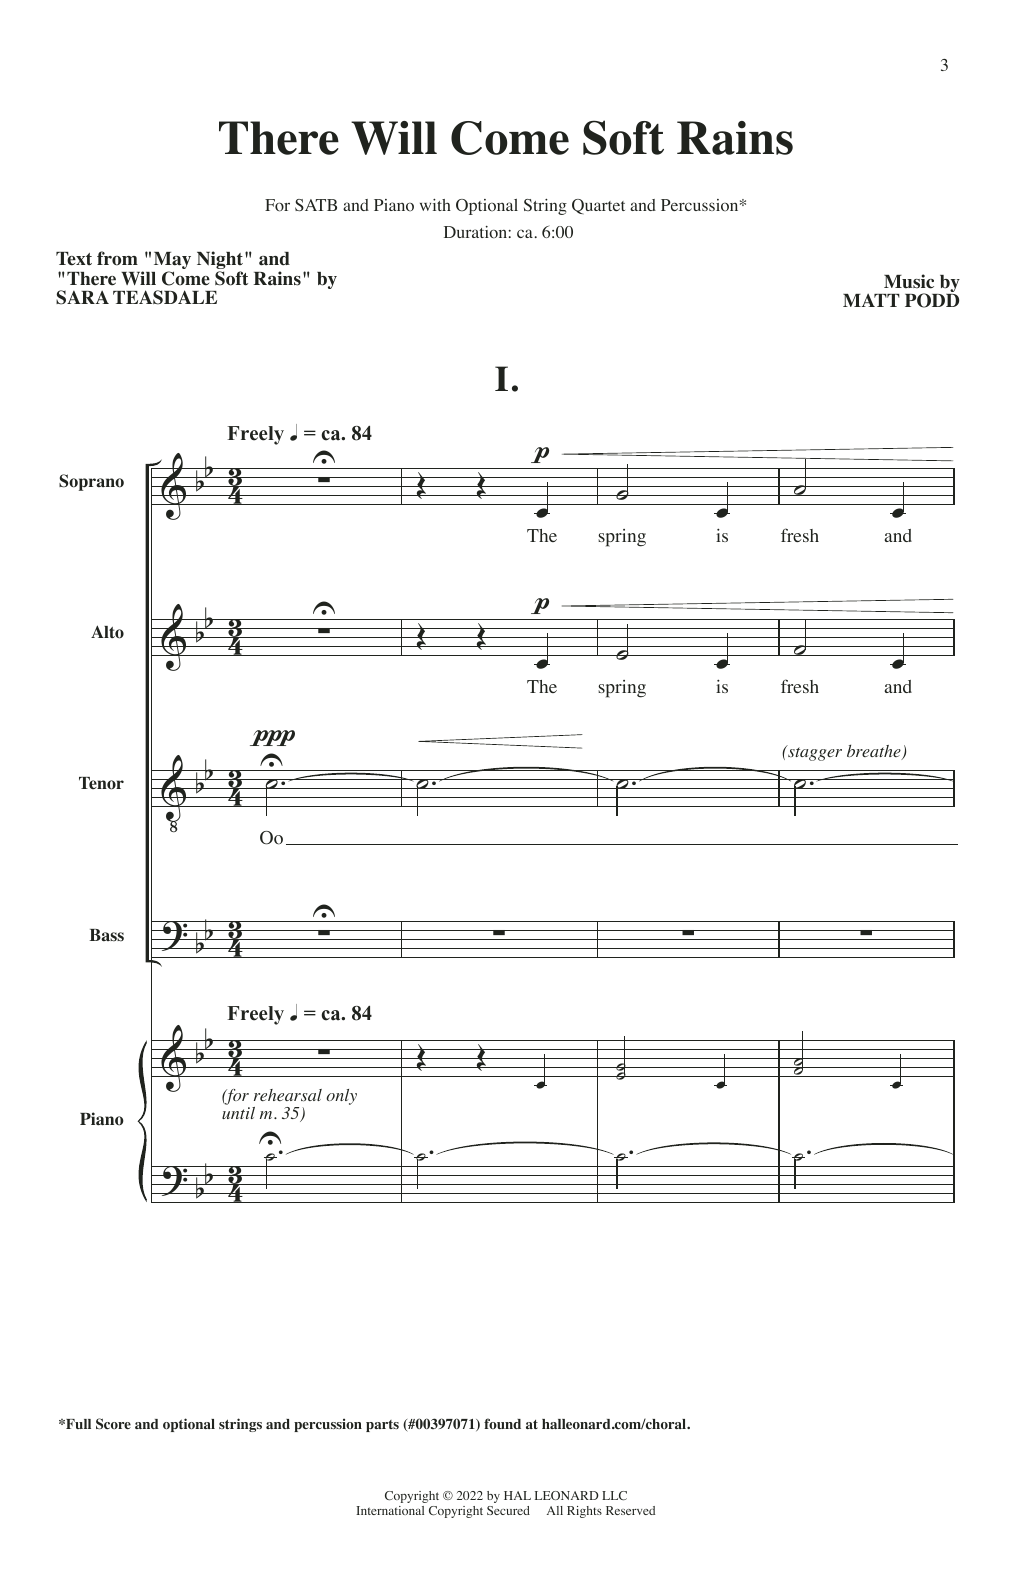 Download Sara Teasdale and Matt Podd There Will Come Soft Rains Sheet Music